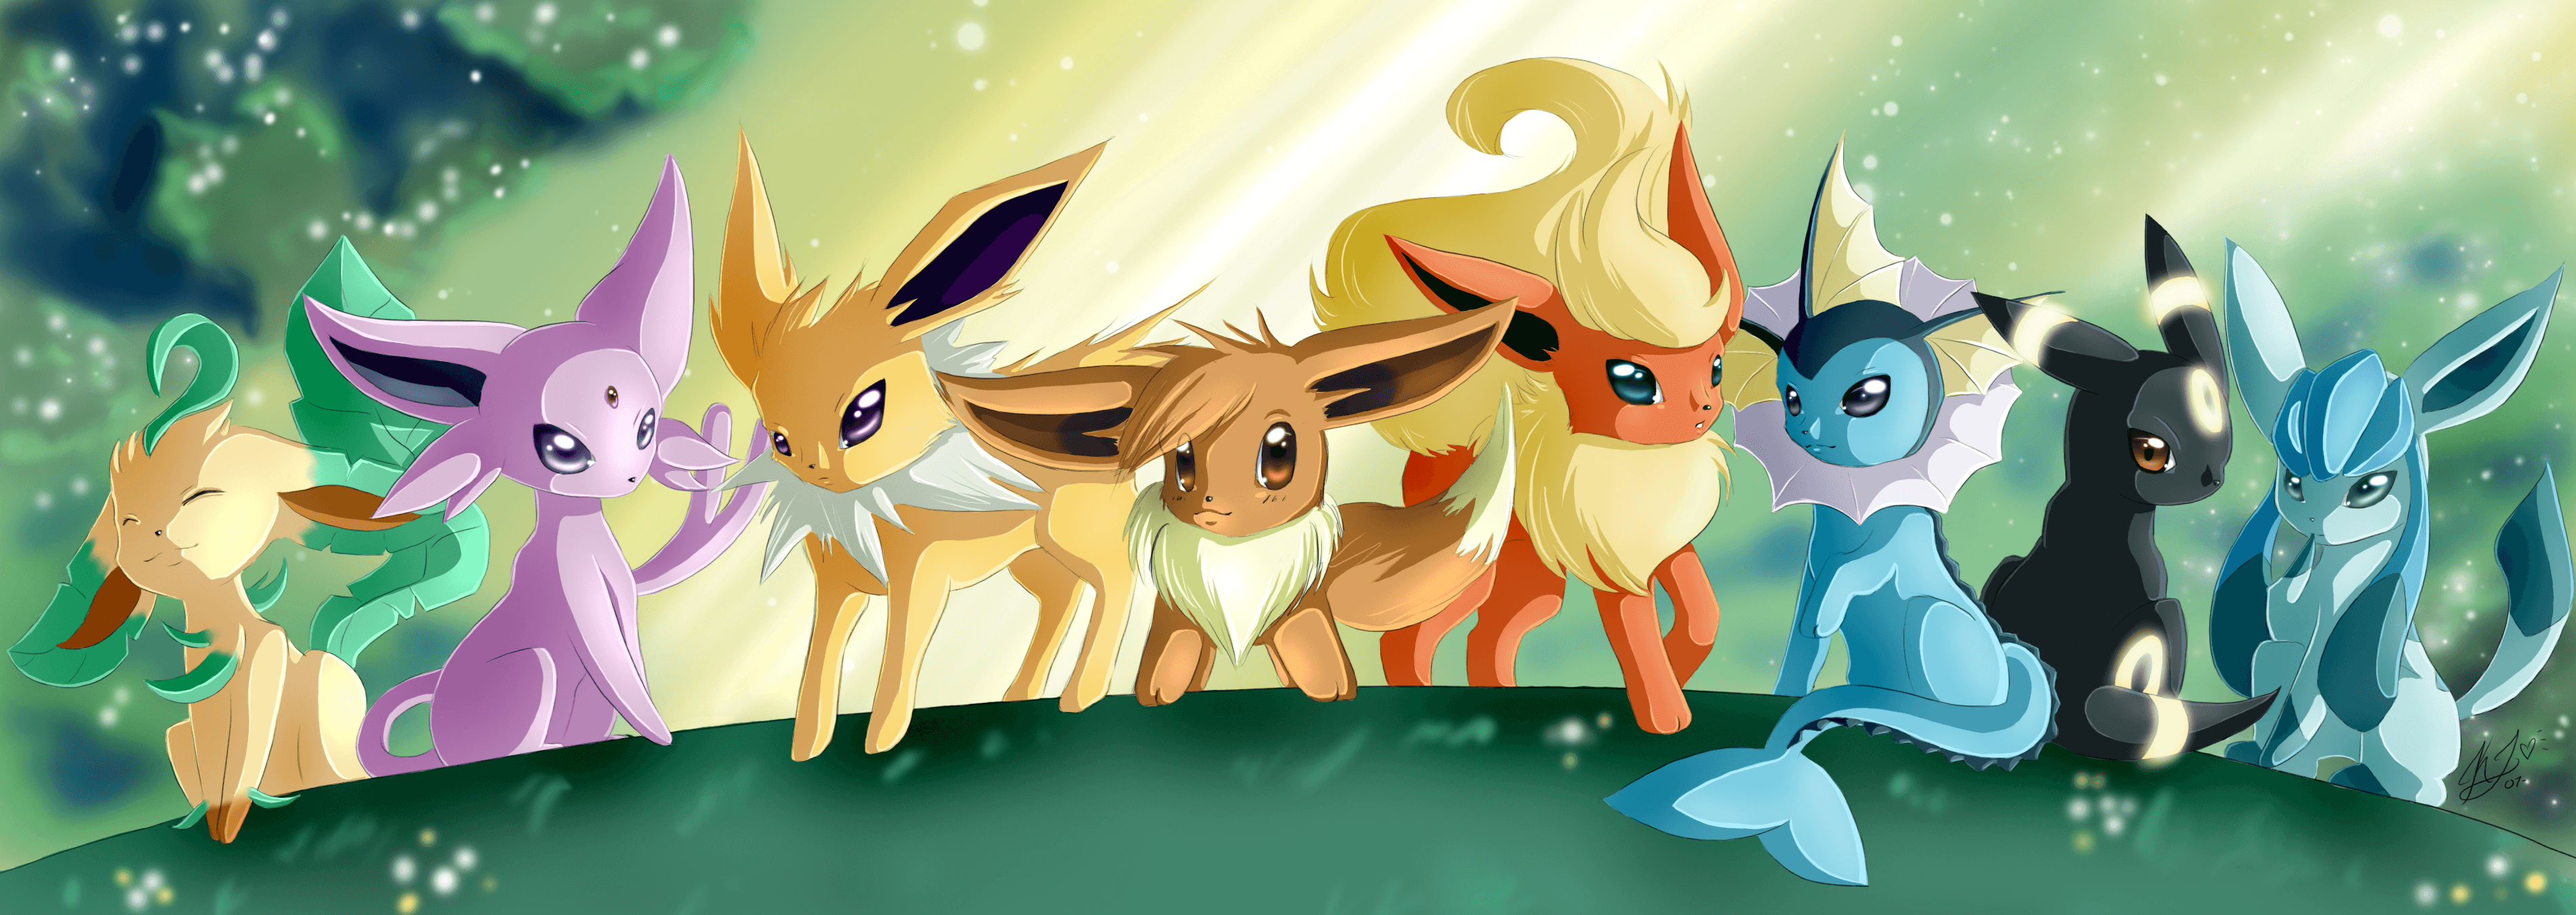 Eeveelution Full HD Wallpaper and Background Imagex1350